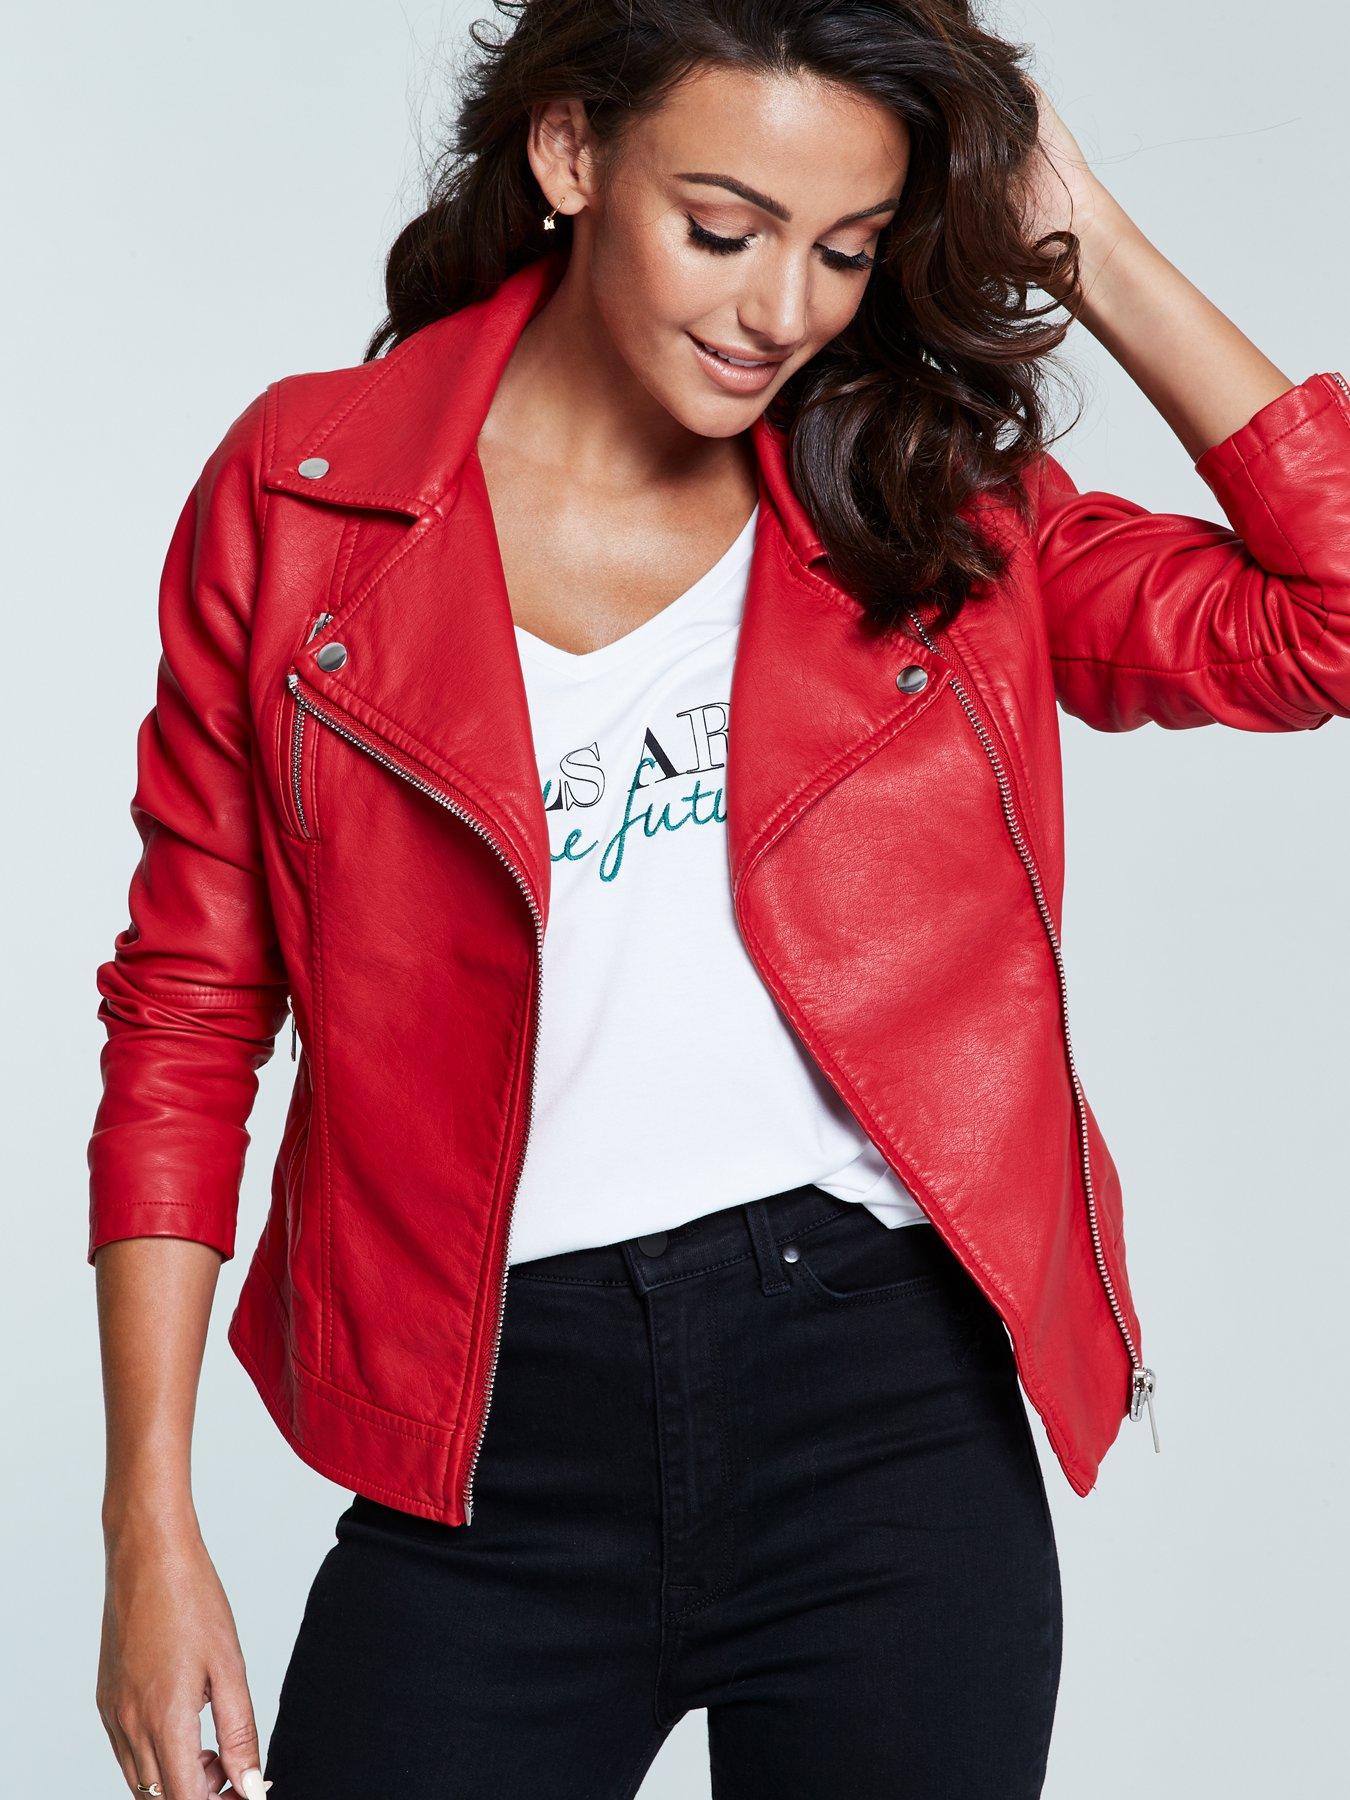 Michelle Keegan photoshoot for very.co.uk